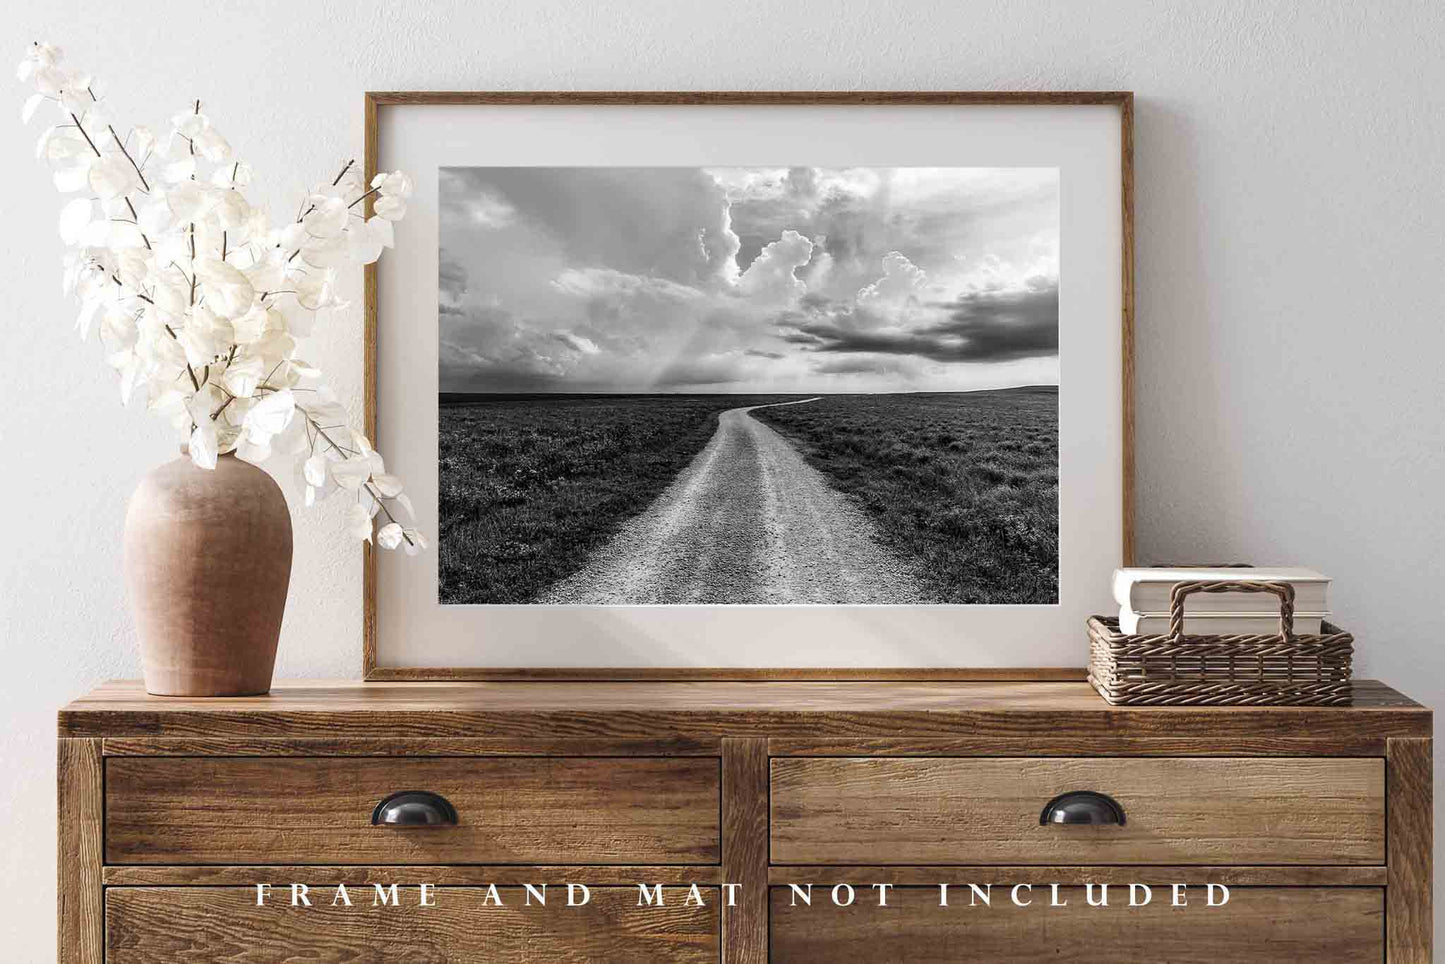 Dirt Road Through the Flint Hills Print, Kansas Pictures, Black and White Photos, Farmhouse Wall Art, Country Decor, Graduation Gifts